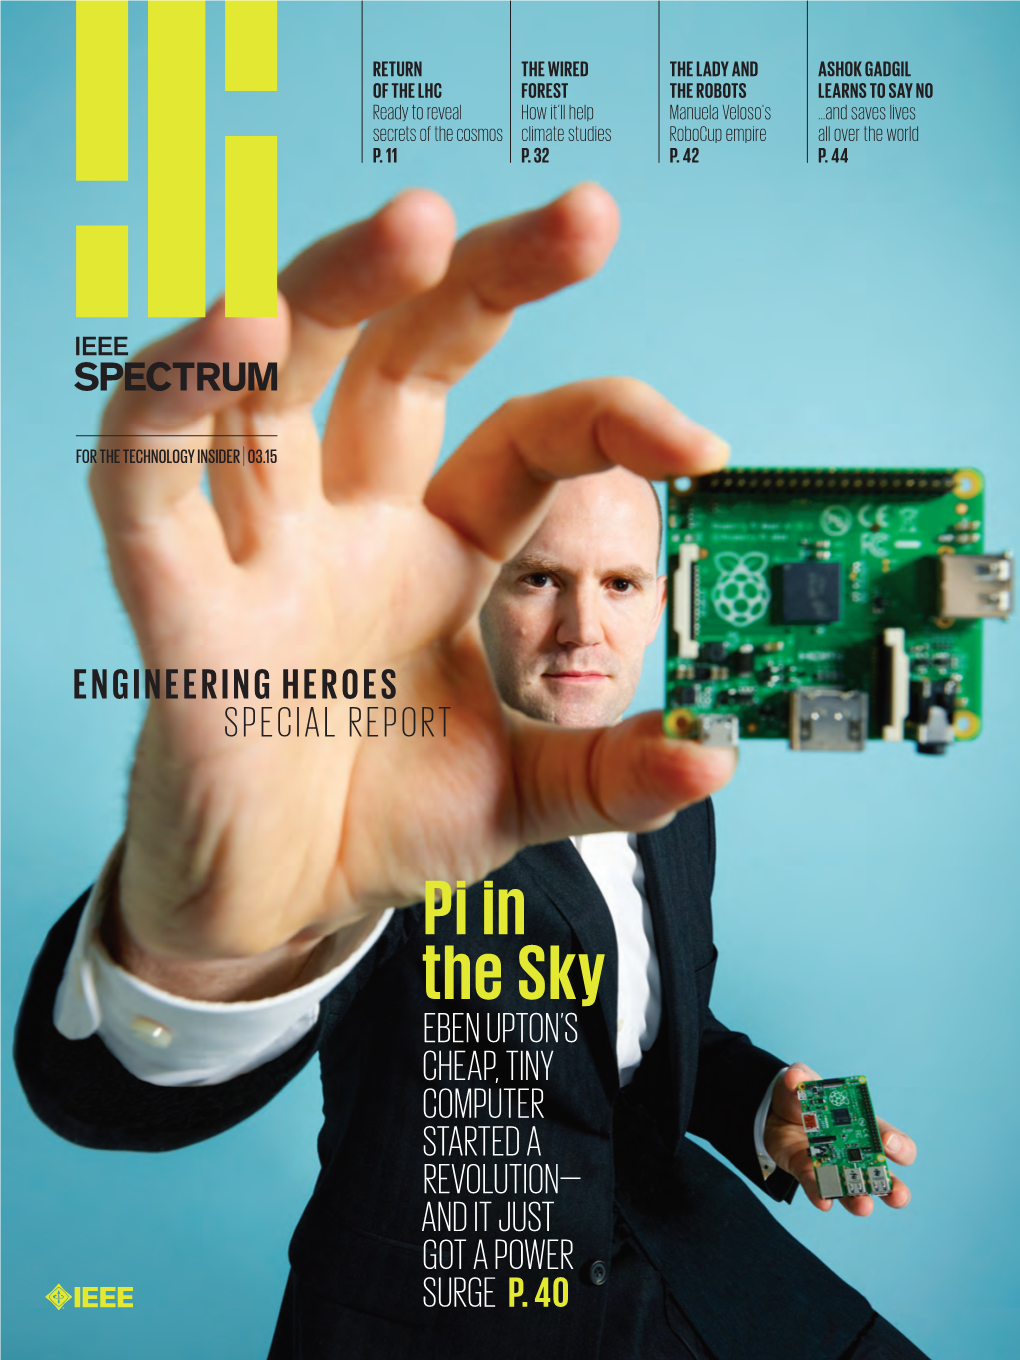 Pi in the Sky Eben Upton’S Cheap, Tiny Computer Started a Revolution— and It Just Got a Power Surge P